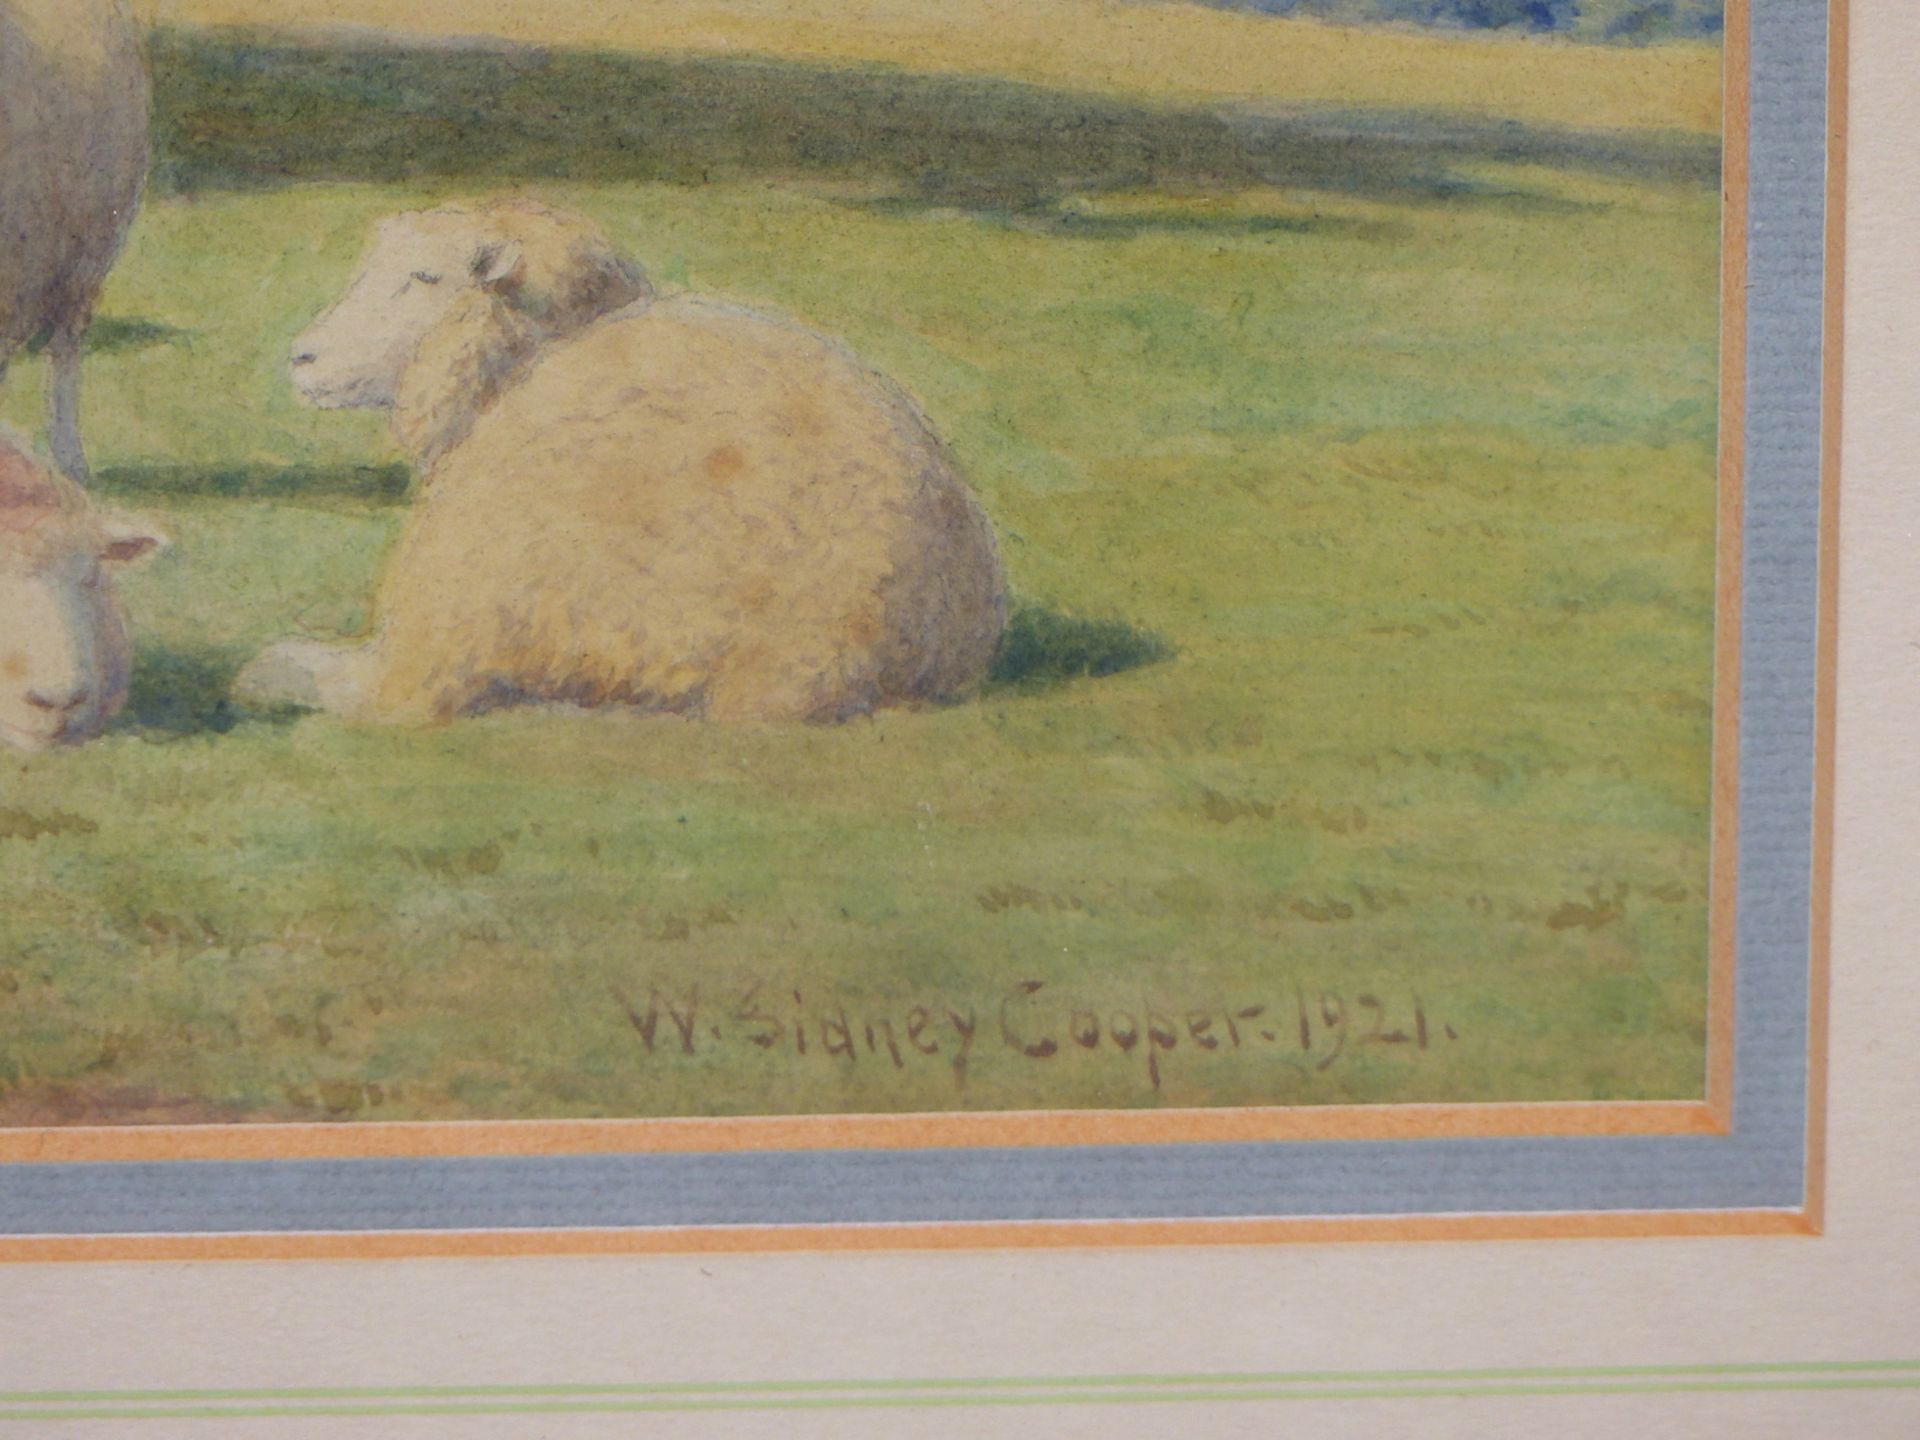 WILLIAM SIDNEY COOPER (1854-1927) SHEEP GRAZING. A PAIR OF WATERCOLOURS. EACH SIGNED DATED 1921 & - Image 5 of 8